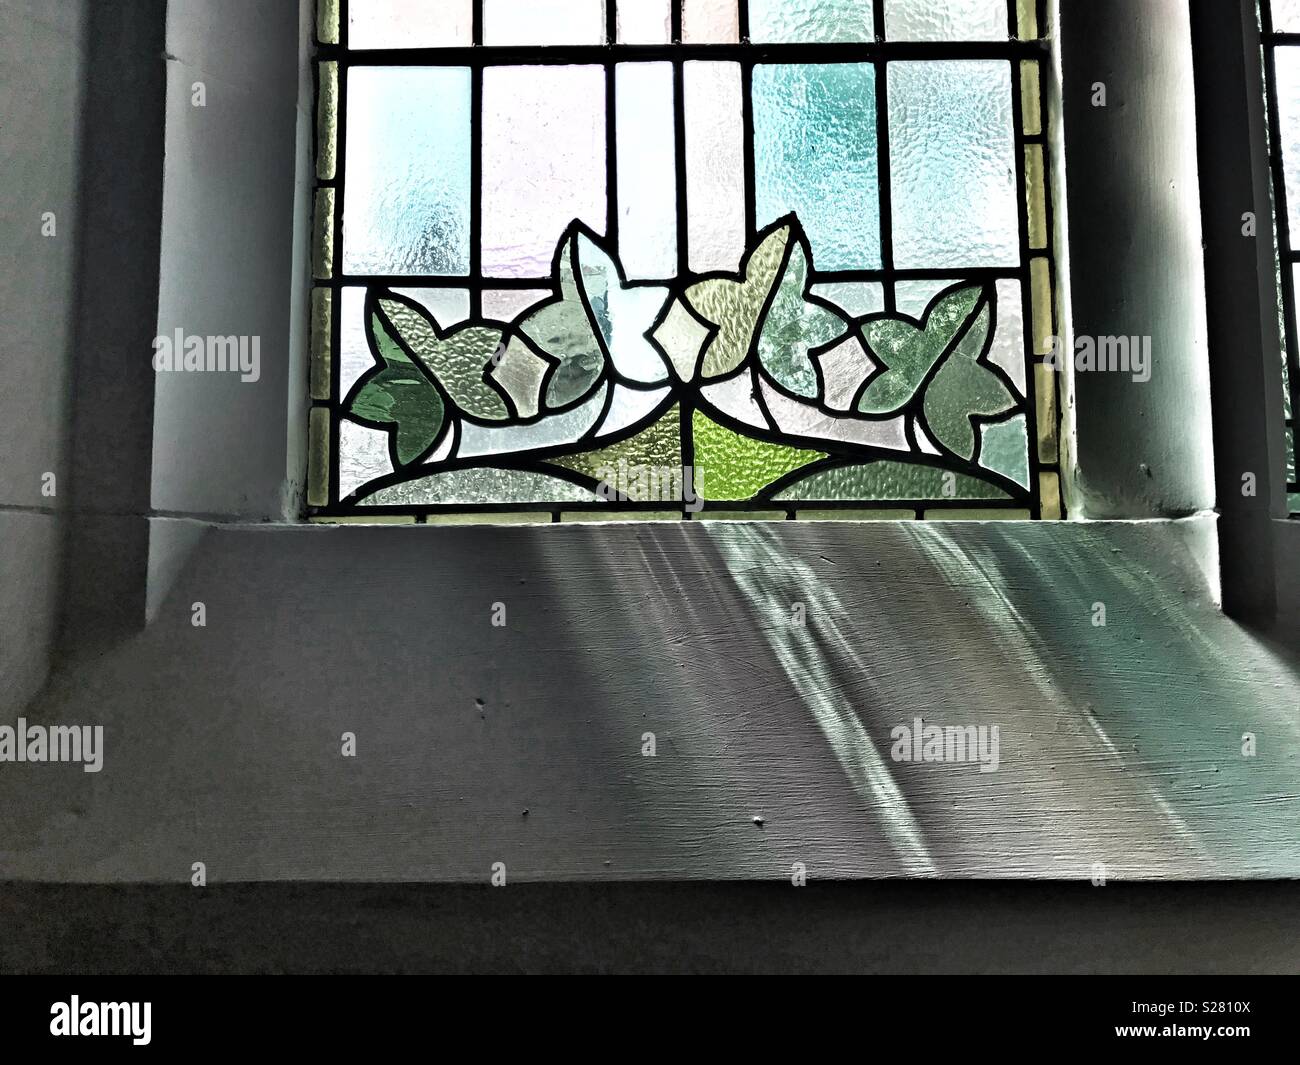 Stain glass window reflection and shadows Stock Photo